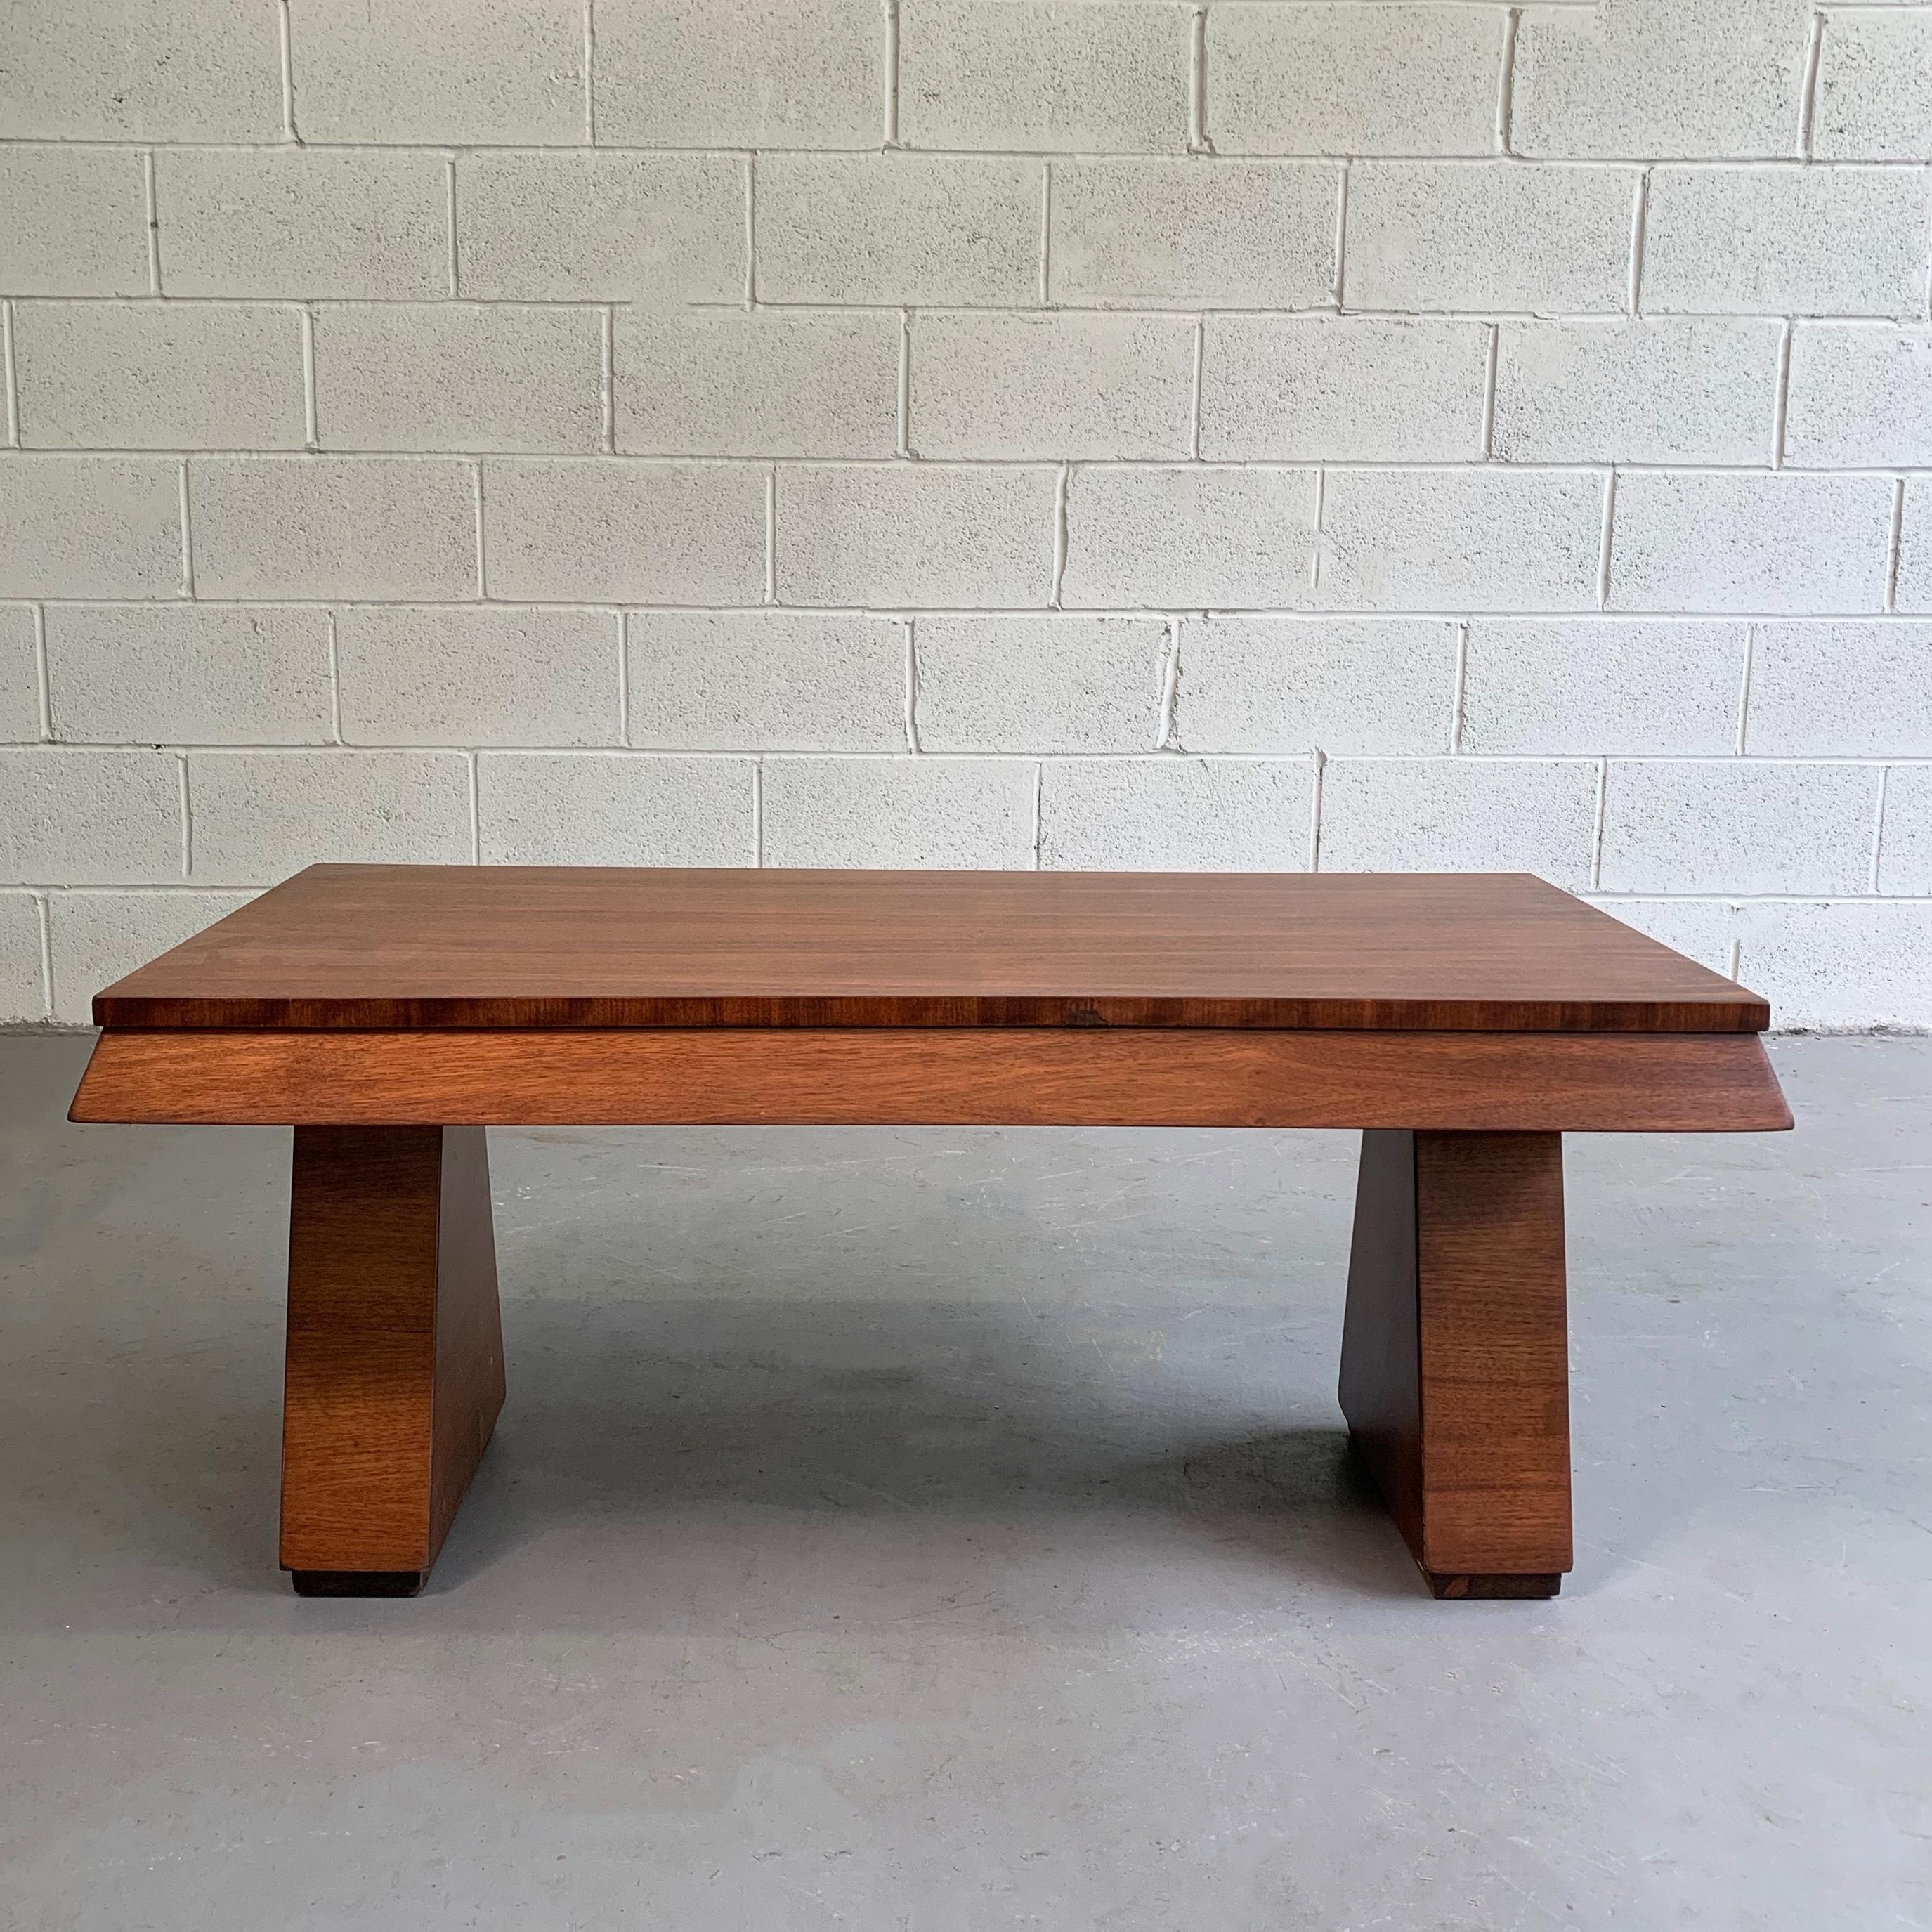 American Art Deco Walnut Coffee Table Attributed to Donald Deskey For Sale